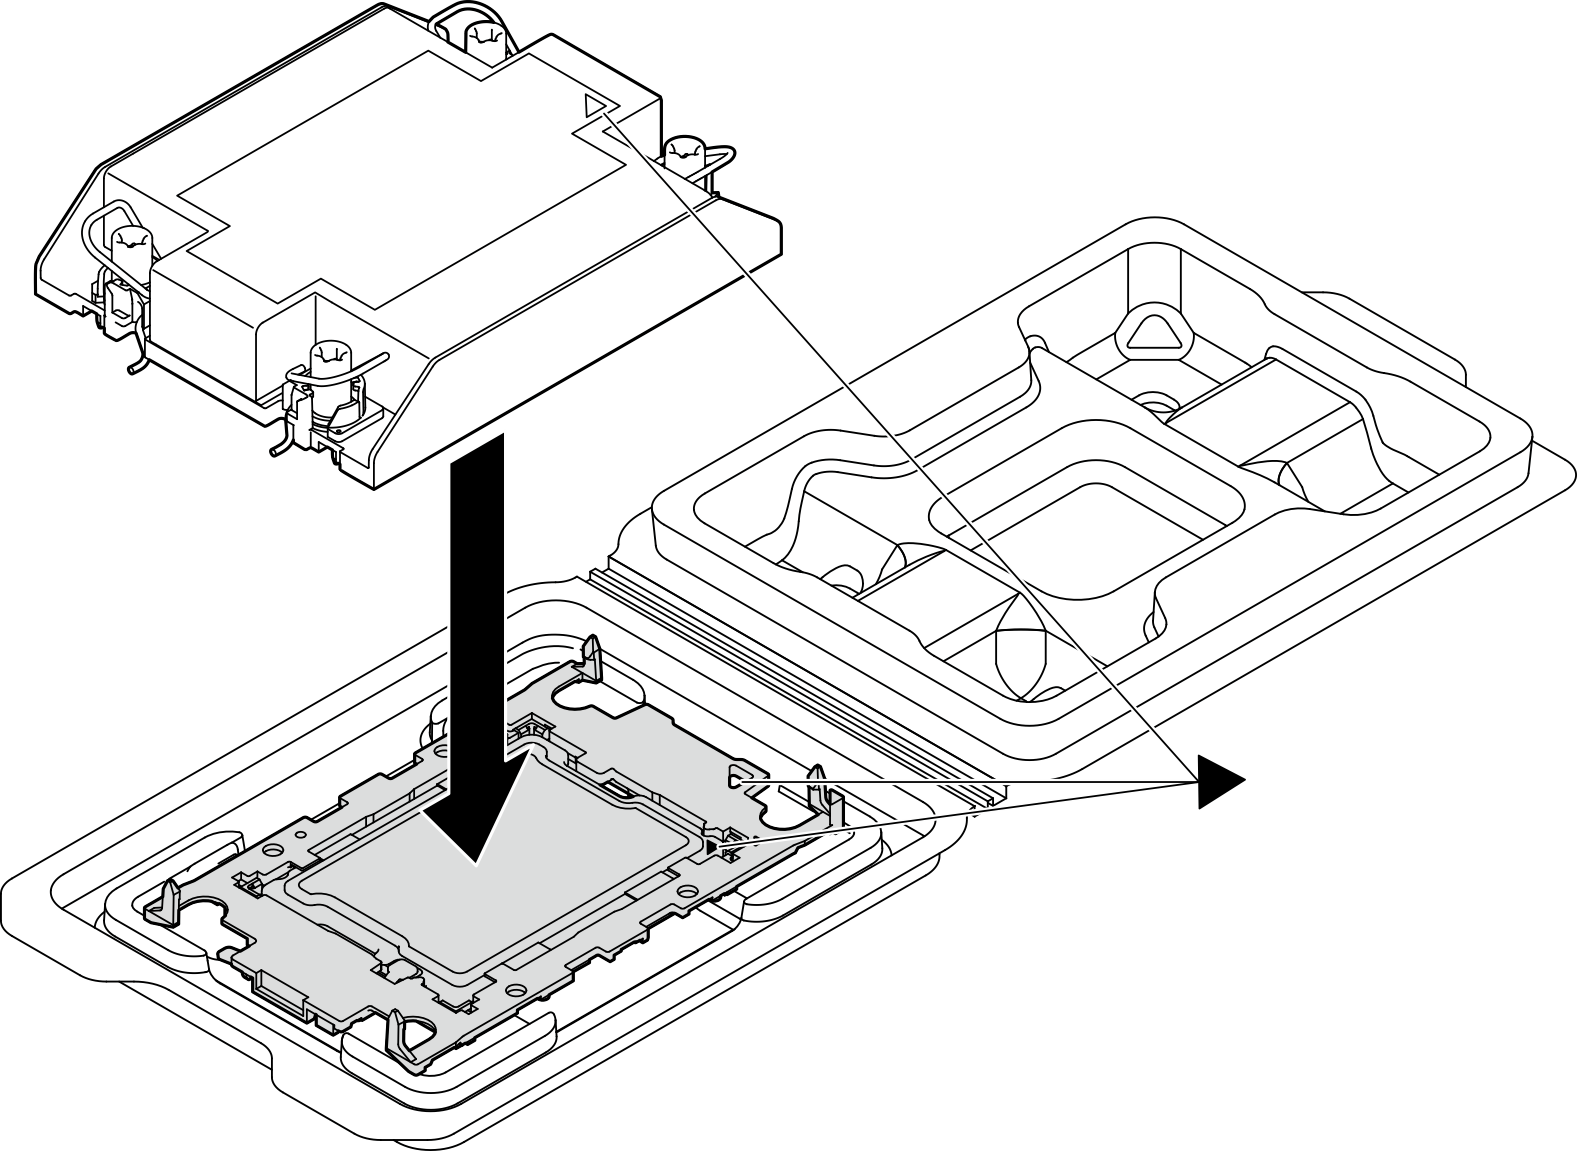 Assembling the PHM with processor in shipping tray